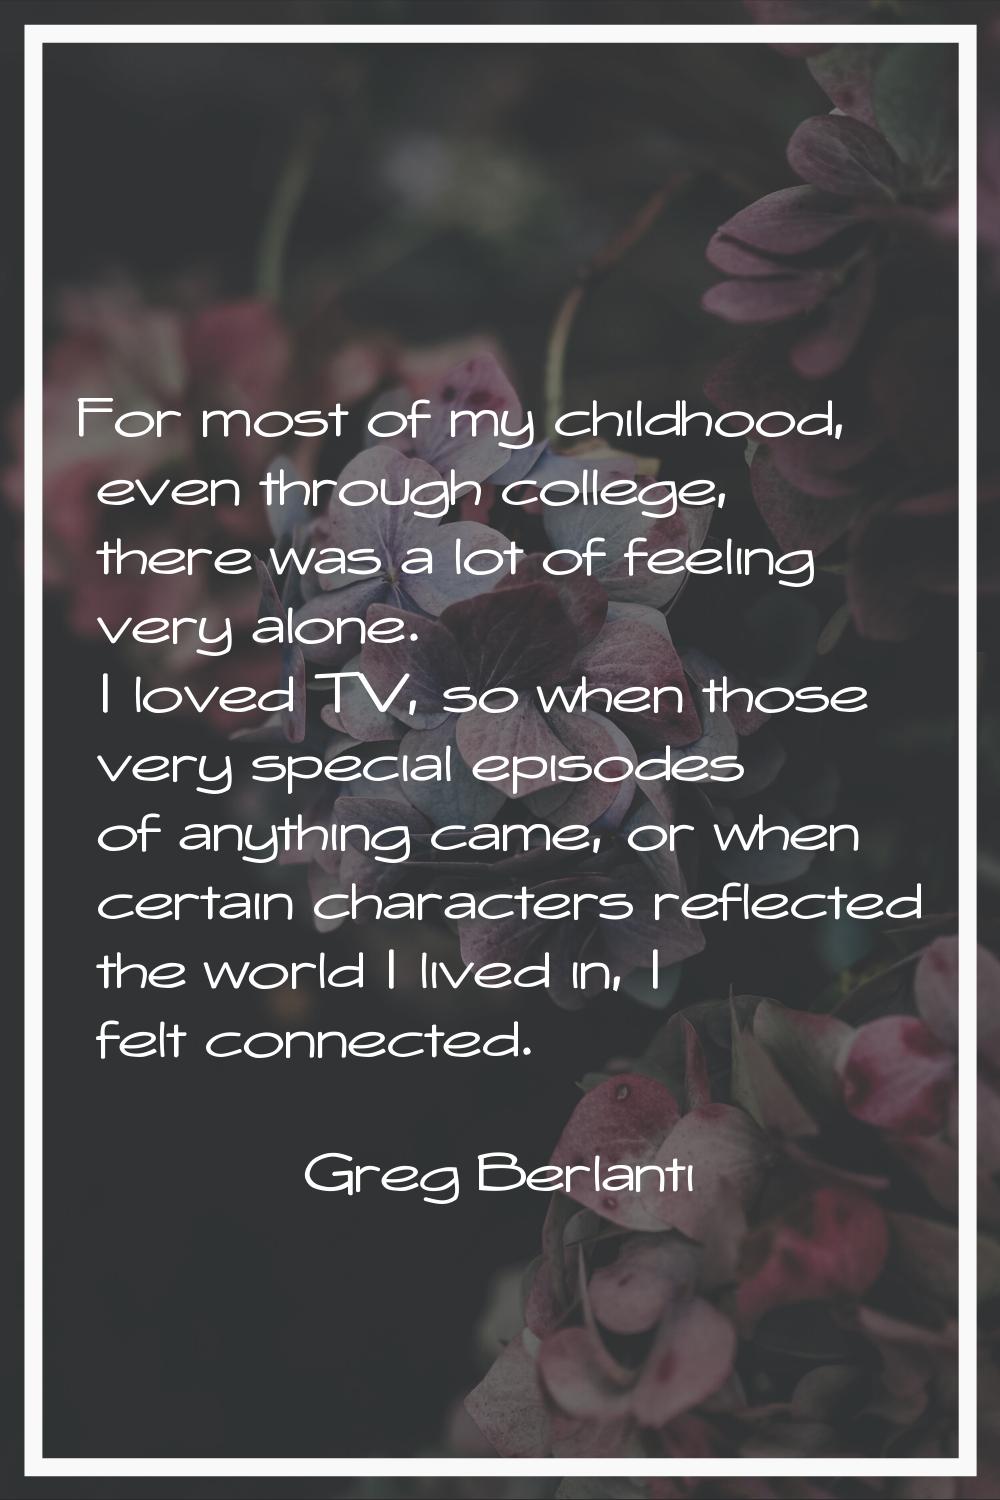 For most of my childhood, even through college, there was a lot of feeling very alone. I loved TV, 